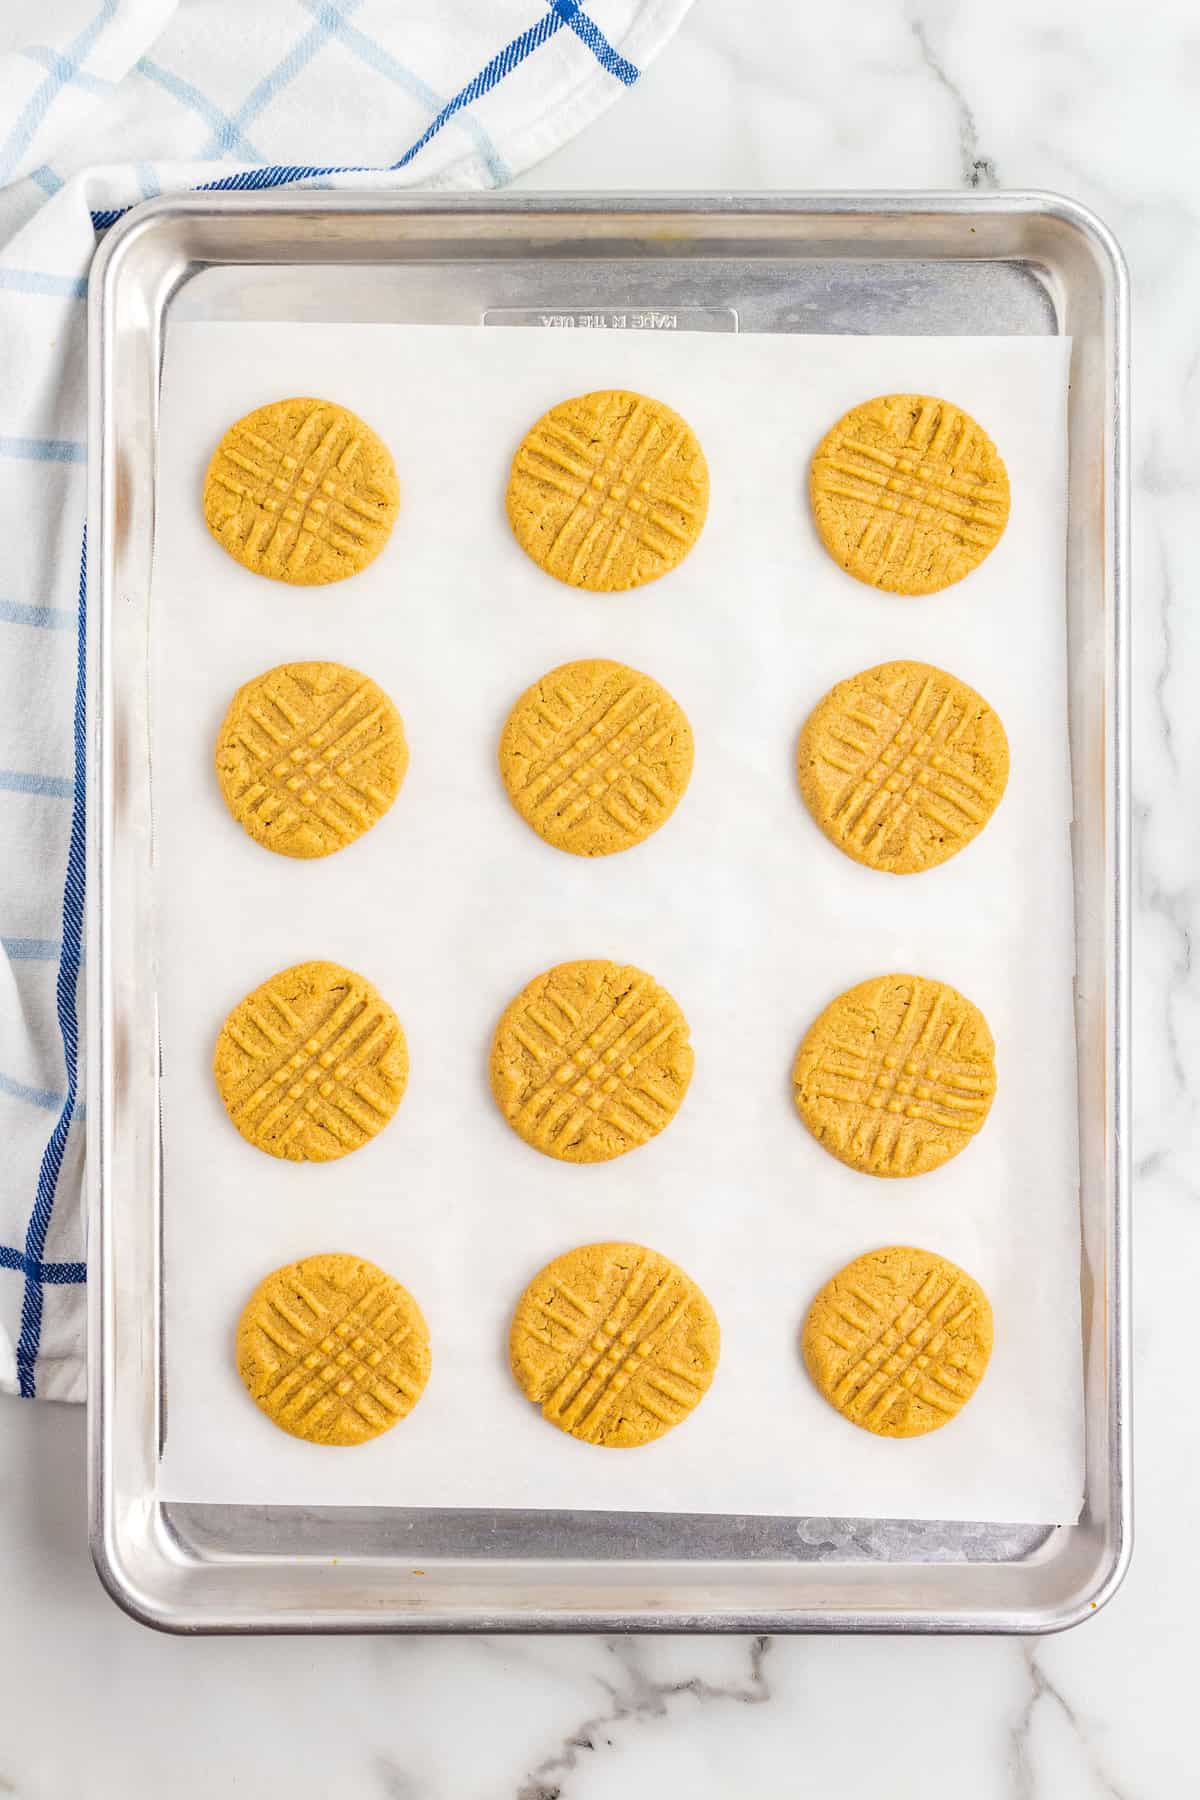 Baked criss crossed peanut butter cookies on sheet pan